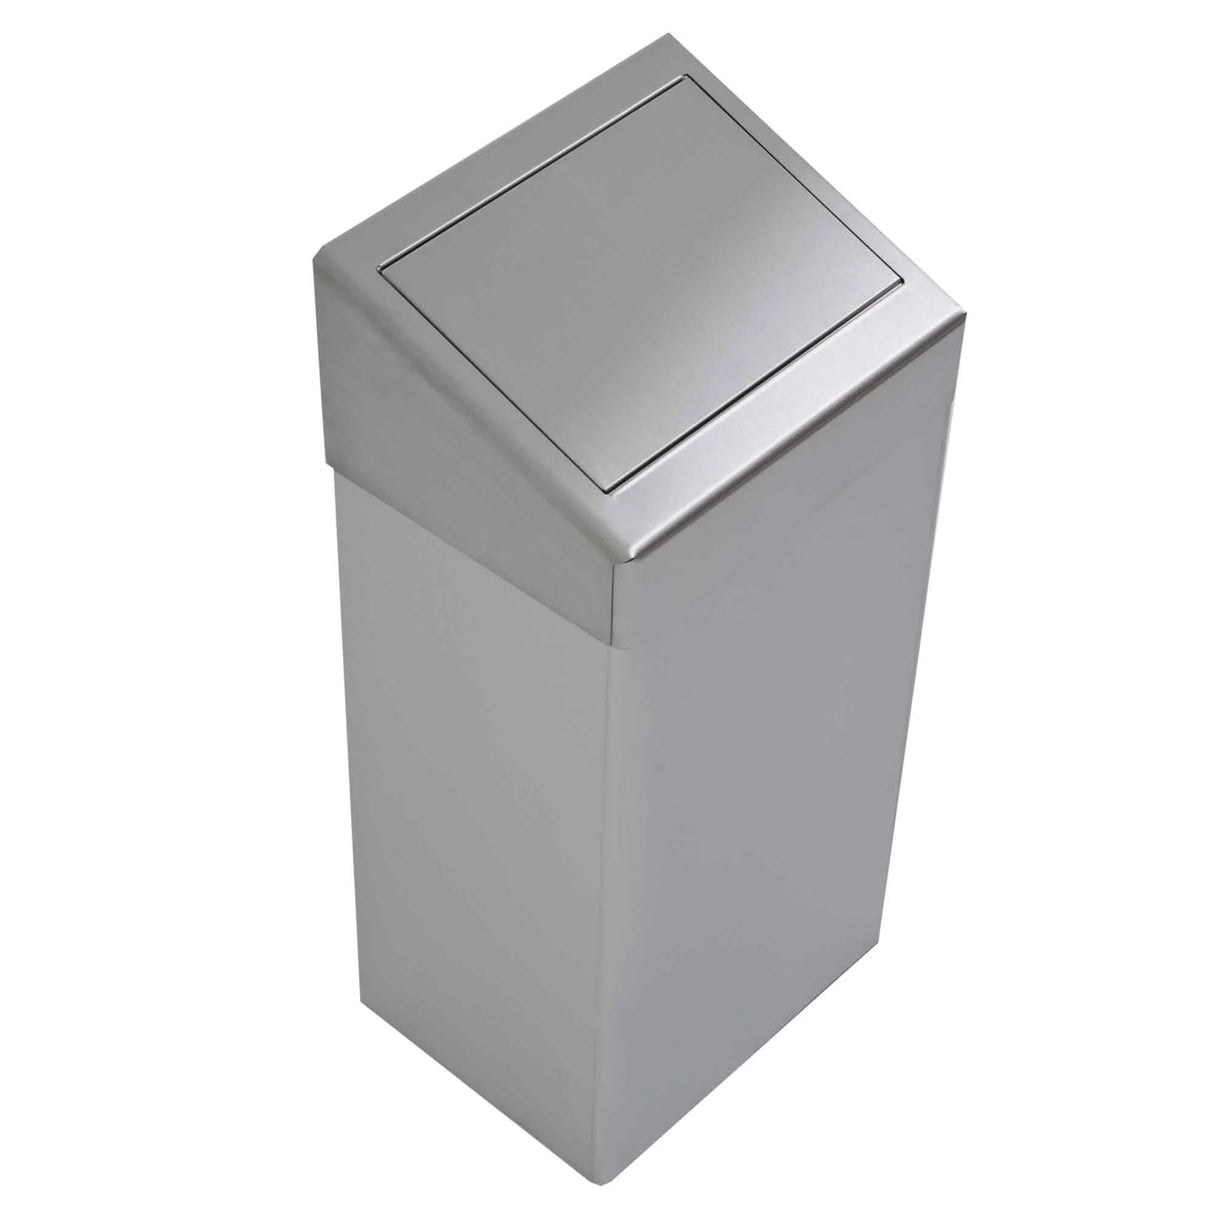 BC150 Dolphin 50LTR Type 304 Stainless Steel Waste Bin With Lid